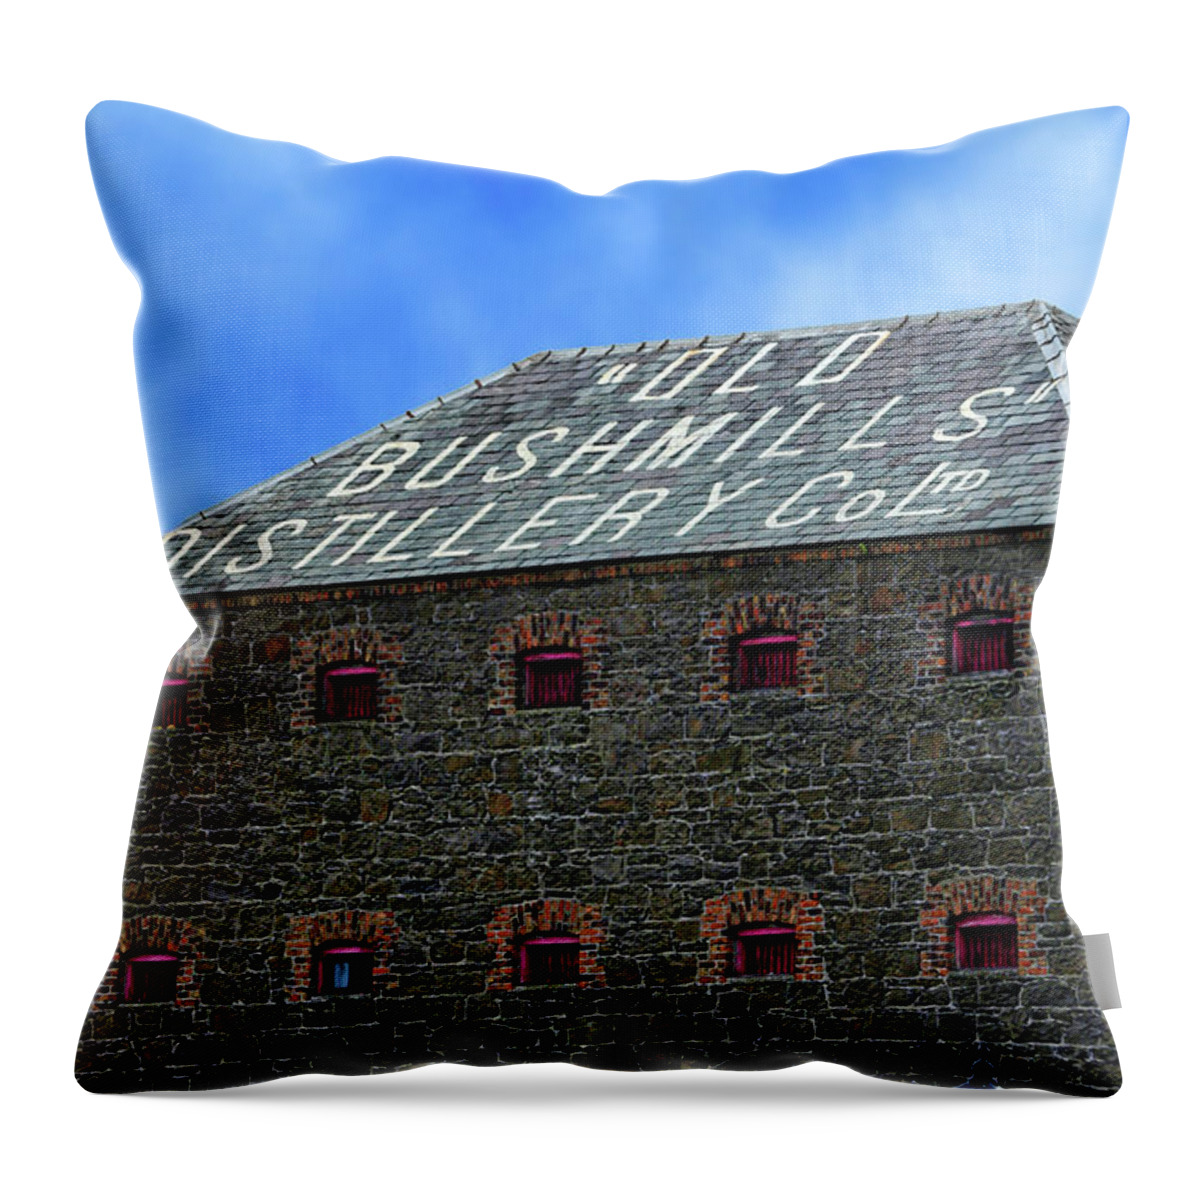 Bushmills Throw Pillow featuring the photograph Old Bushmills Distillery - Ireland by Mitch Spence